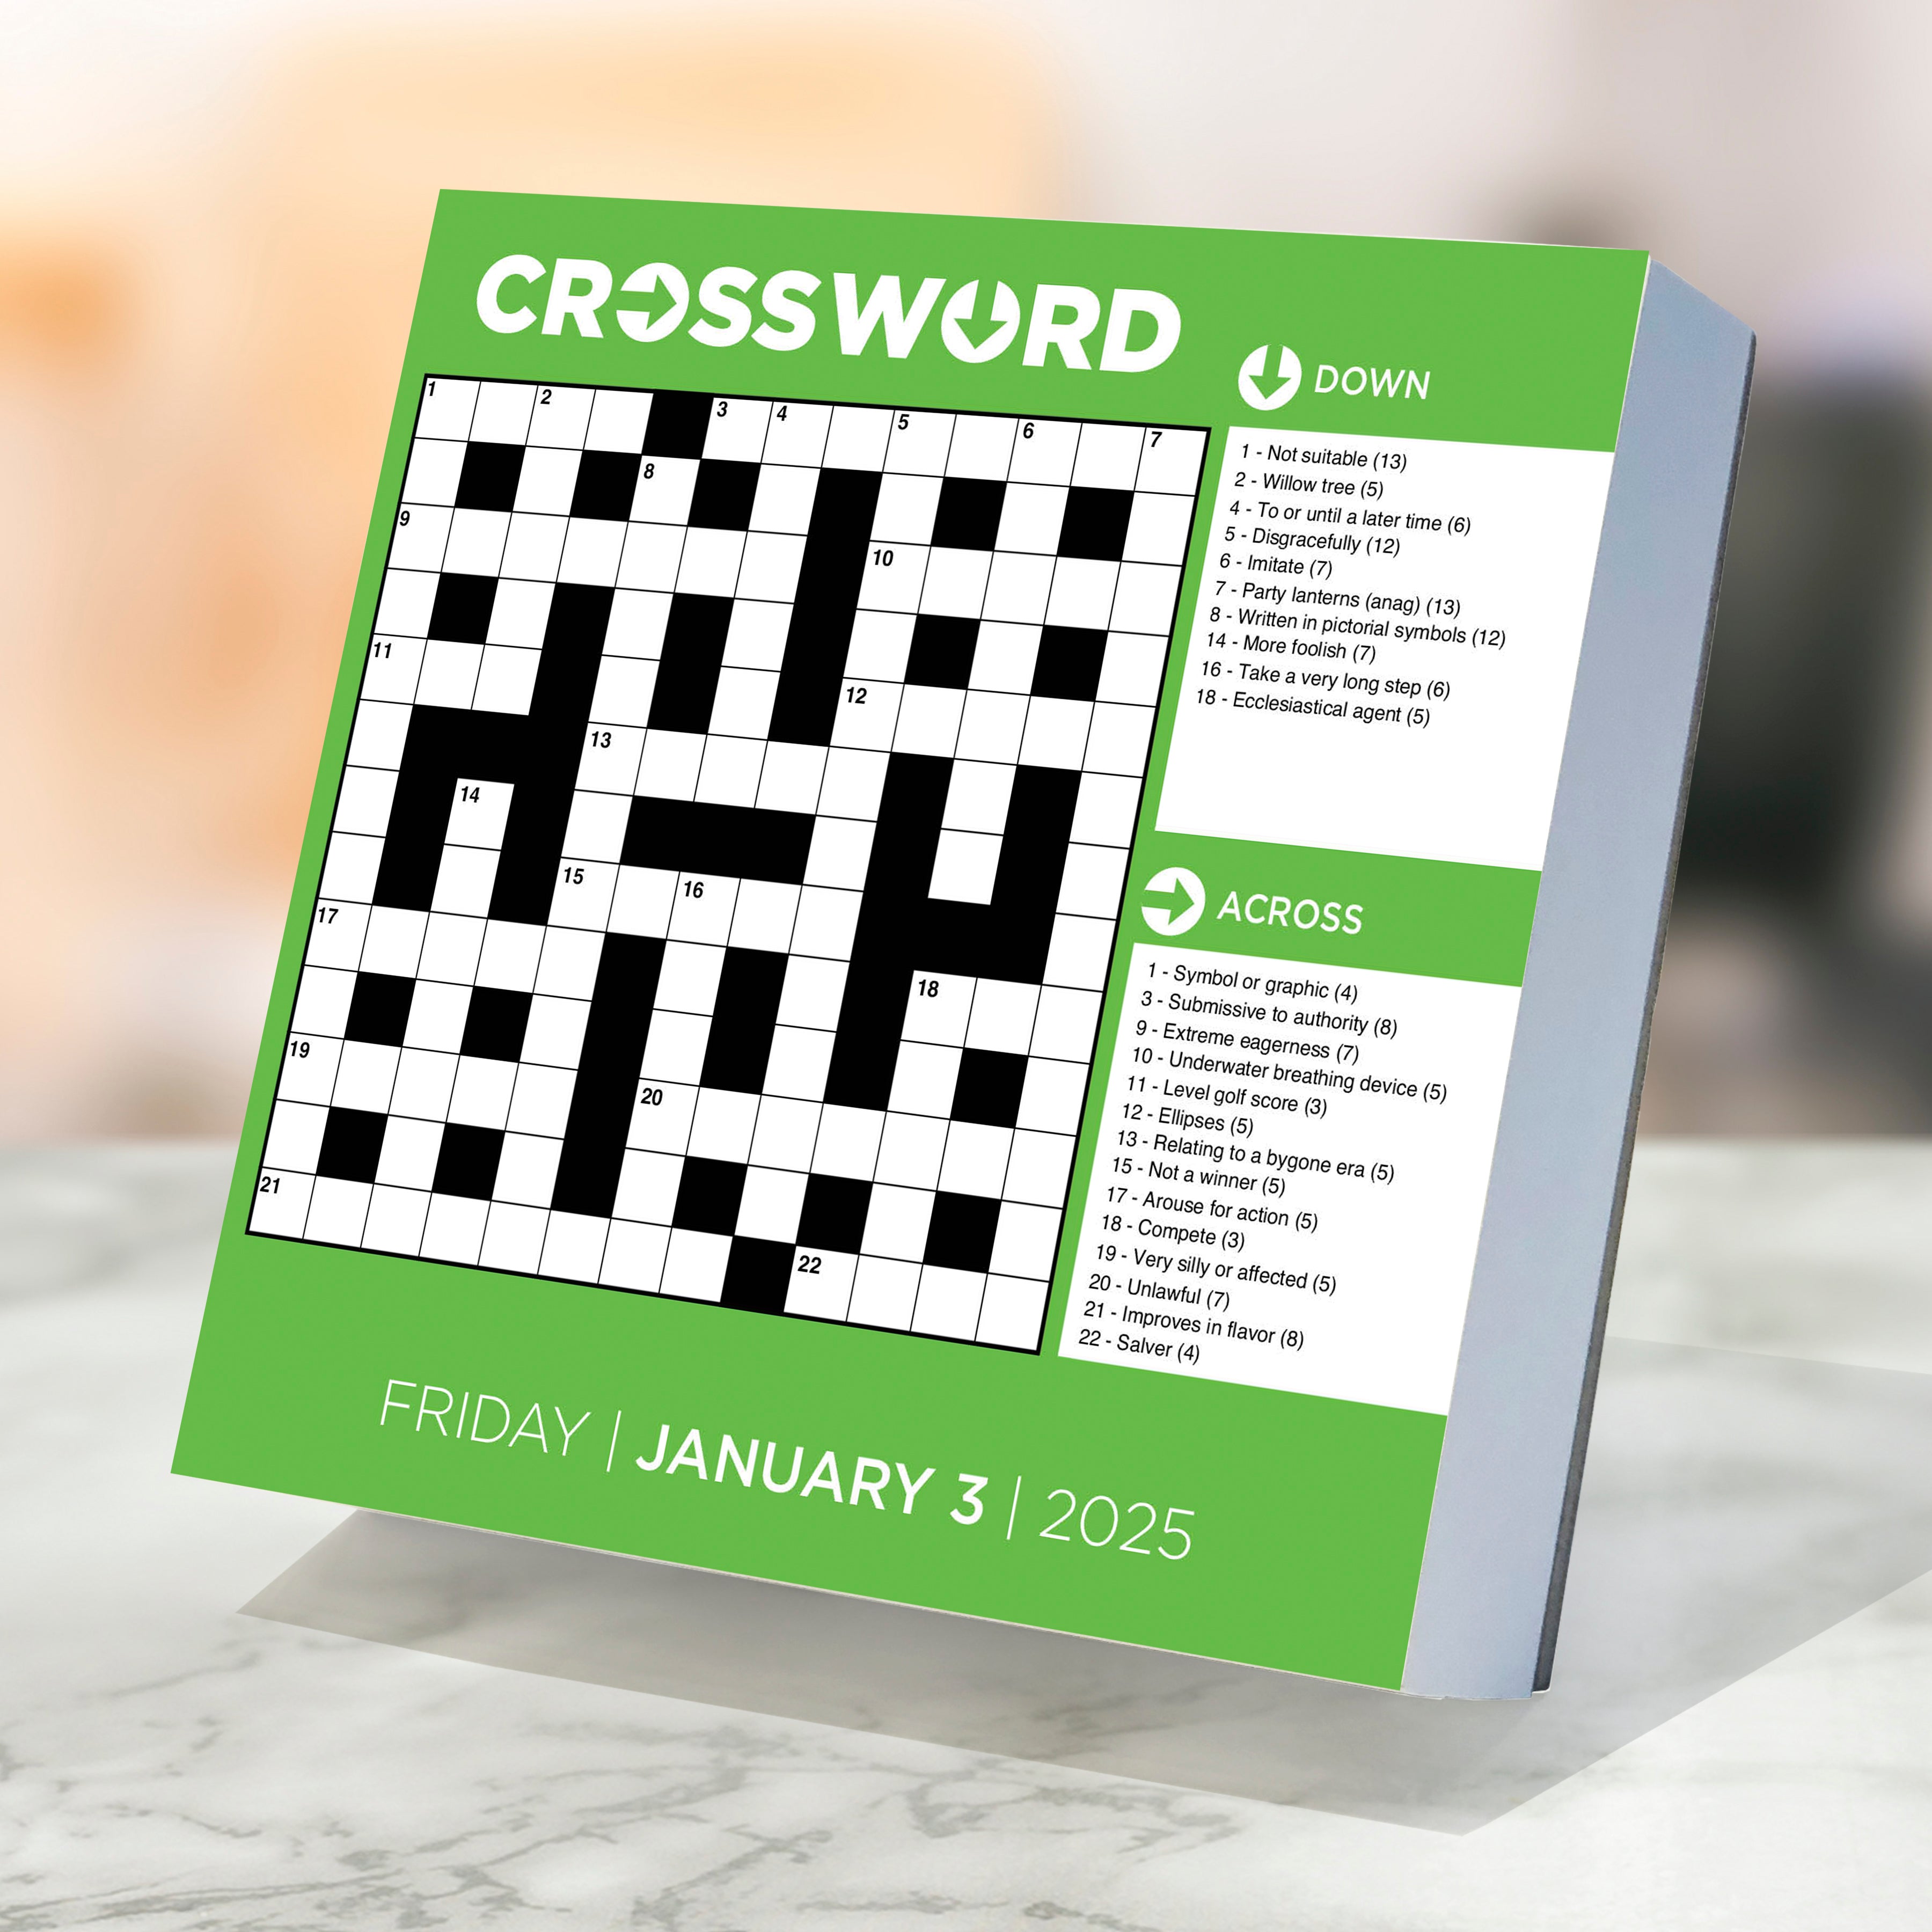 2025 Daily Word Puzzle - Daily Boxed Page-A-Day Calendar